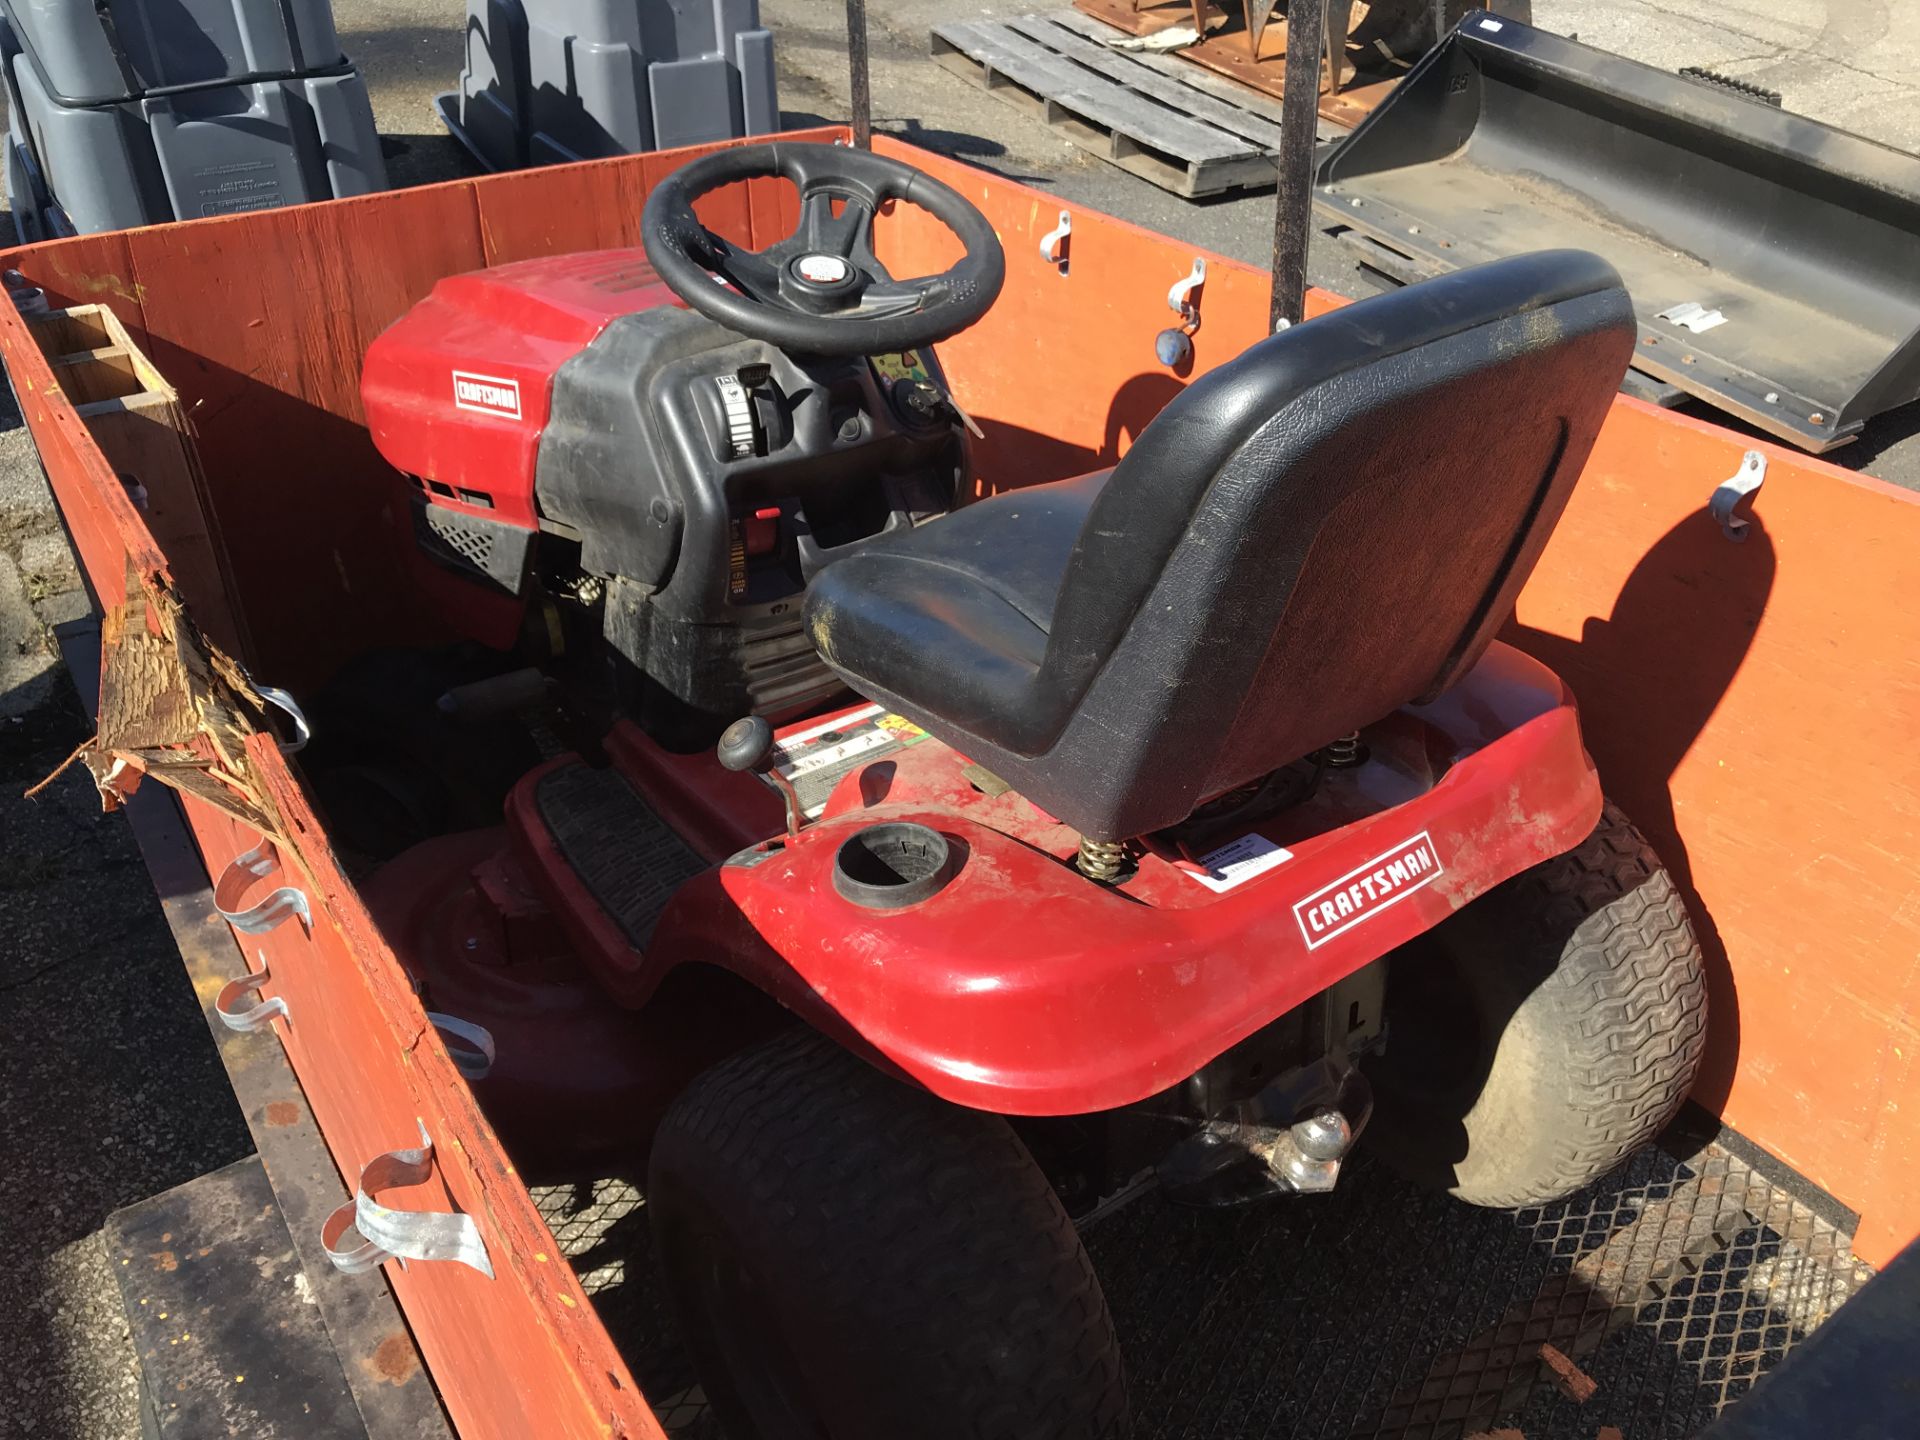 Craftsman Riding Mower with Trailer (Located at 8300 National Highway, Pennsauken, NJ) - Image 5 of 8